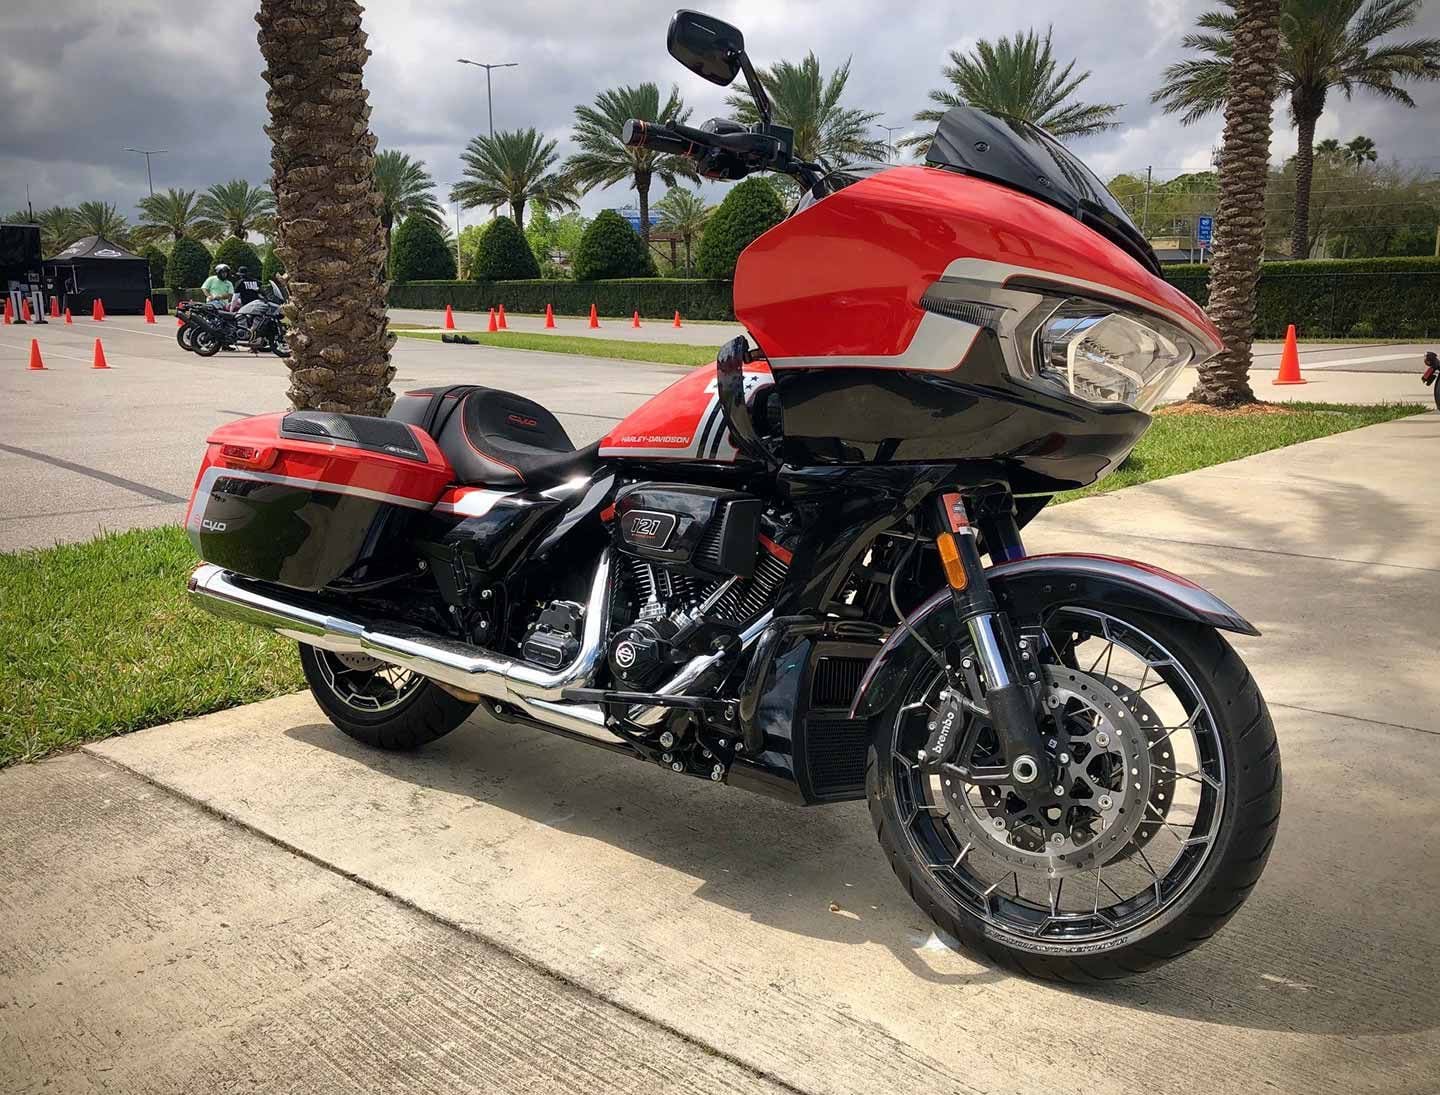 Checking out some of the new bikes in the Harley demo area, including this burly 2024 CVO Road Glide with the Milwaukee-Eight VVT 121 engine featuring variable valve timing (VVT).